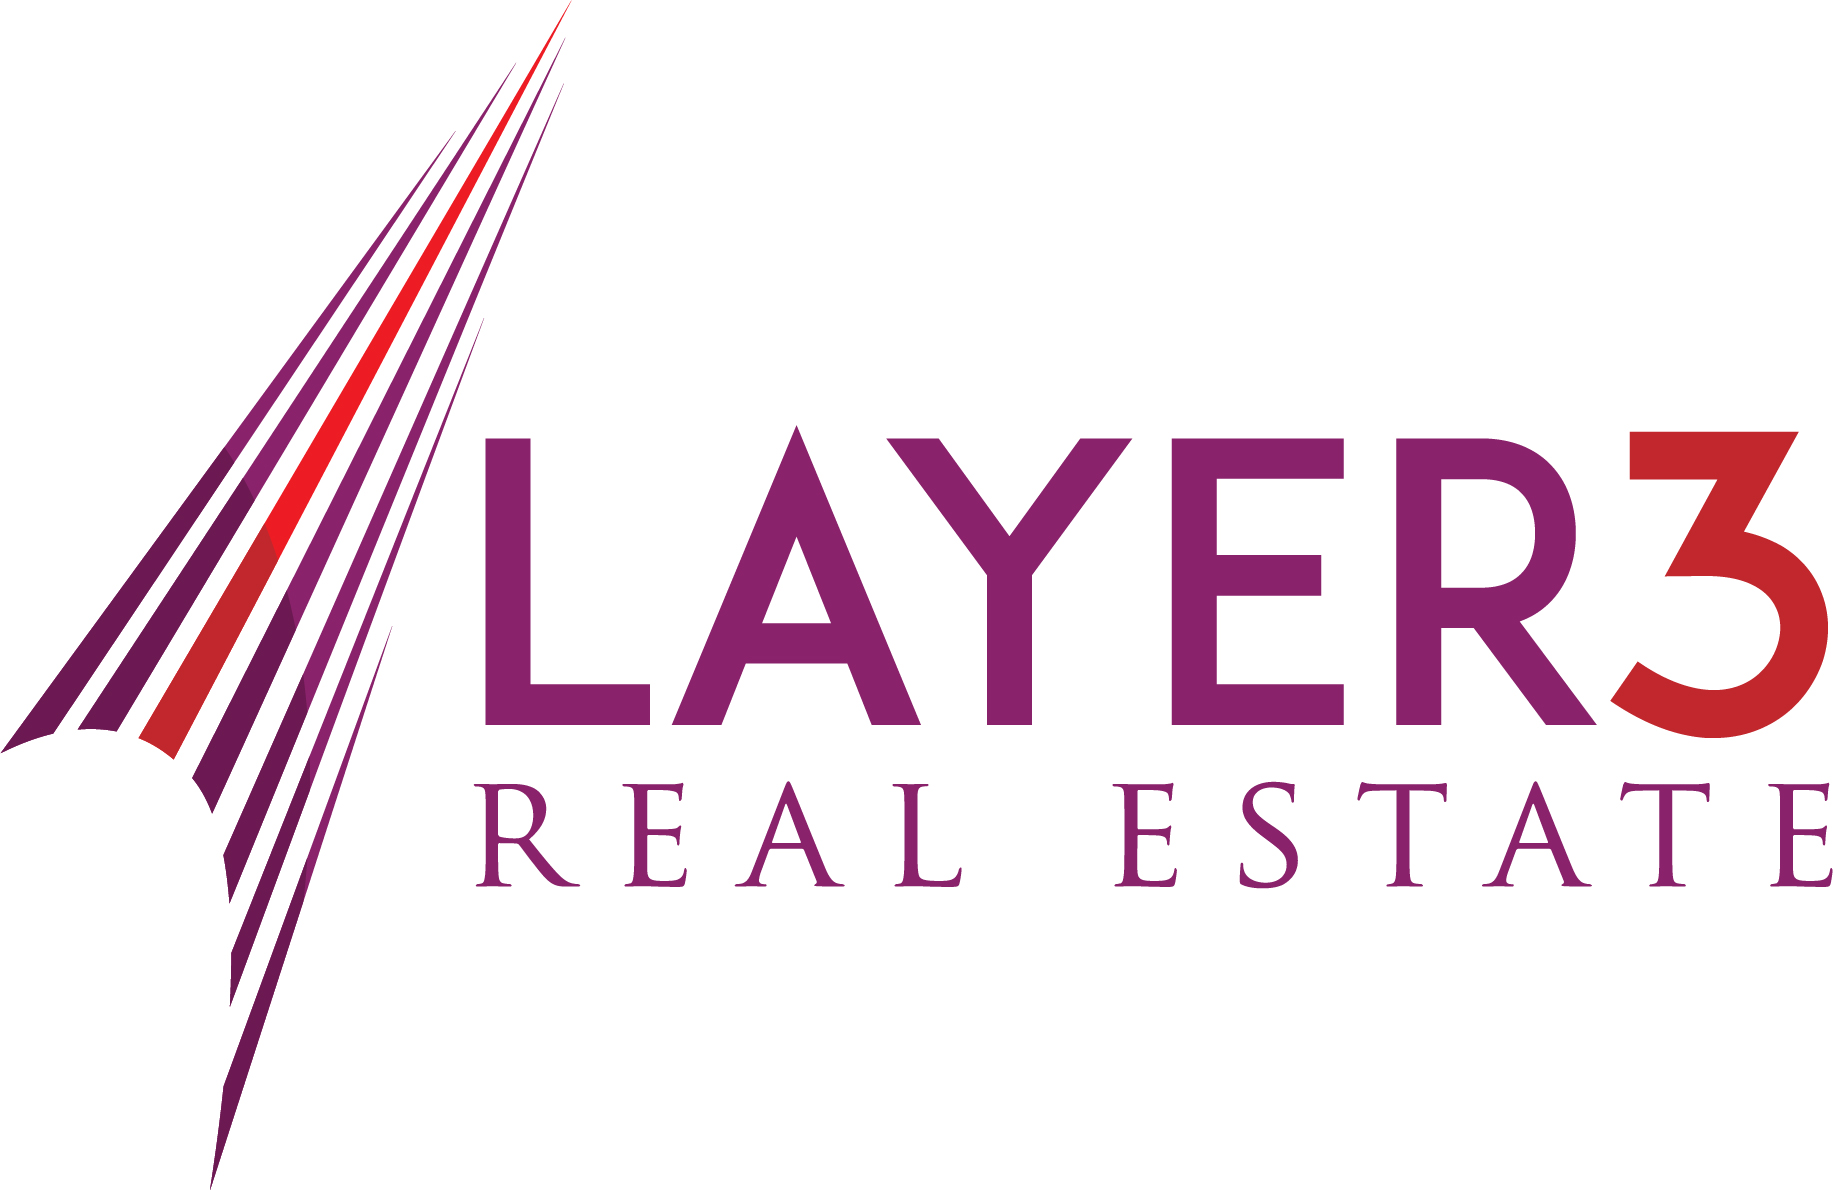 Layer 3 Real Estate